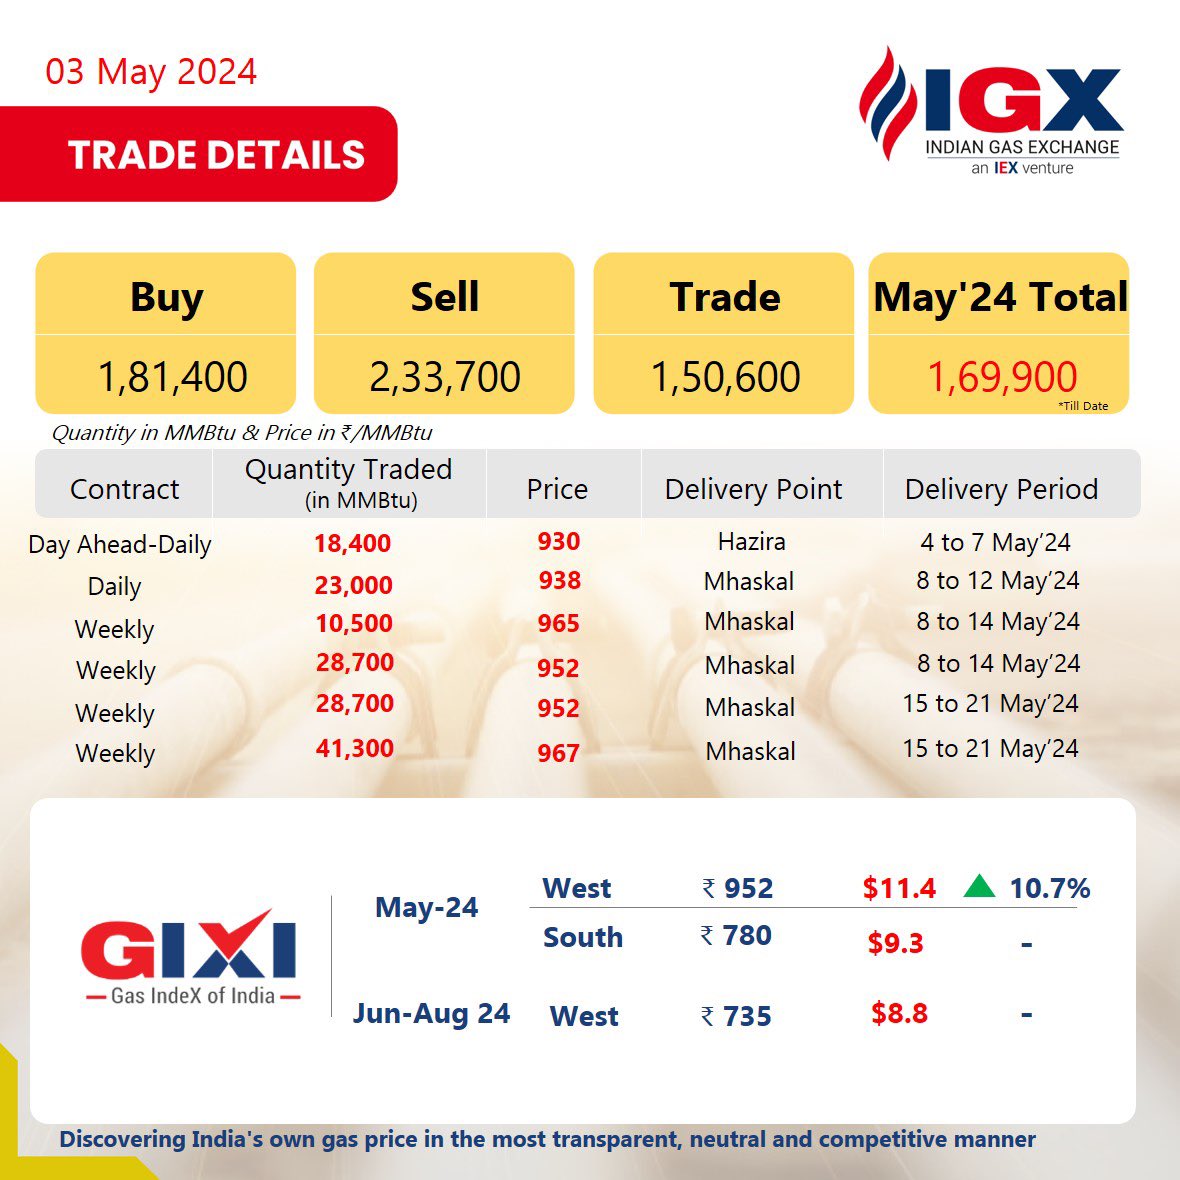 IGX trades 1,50,600 MMBTu quantity at Hazira & Mhaskal delivery points, with delivery scheduled from 4 May'24 to 21 May'24. 
#IGXIndia #GasMarkets #LNG #IGX